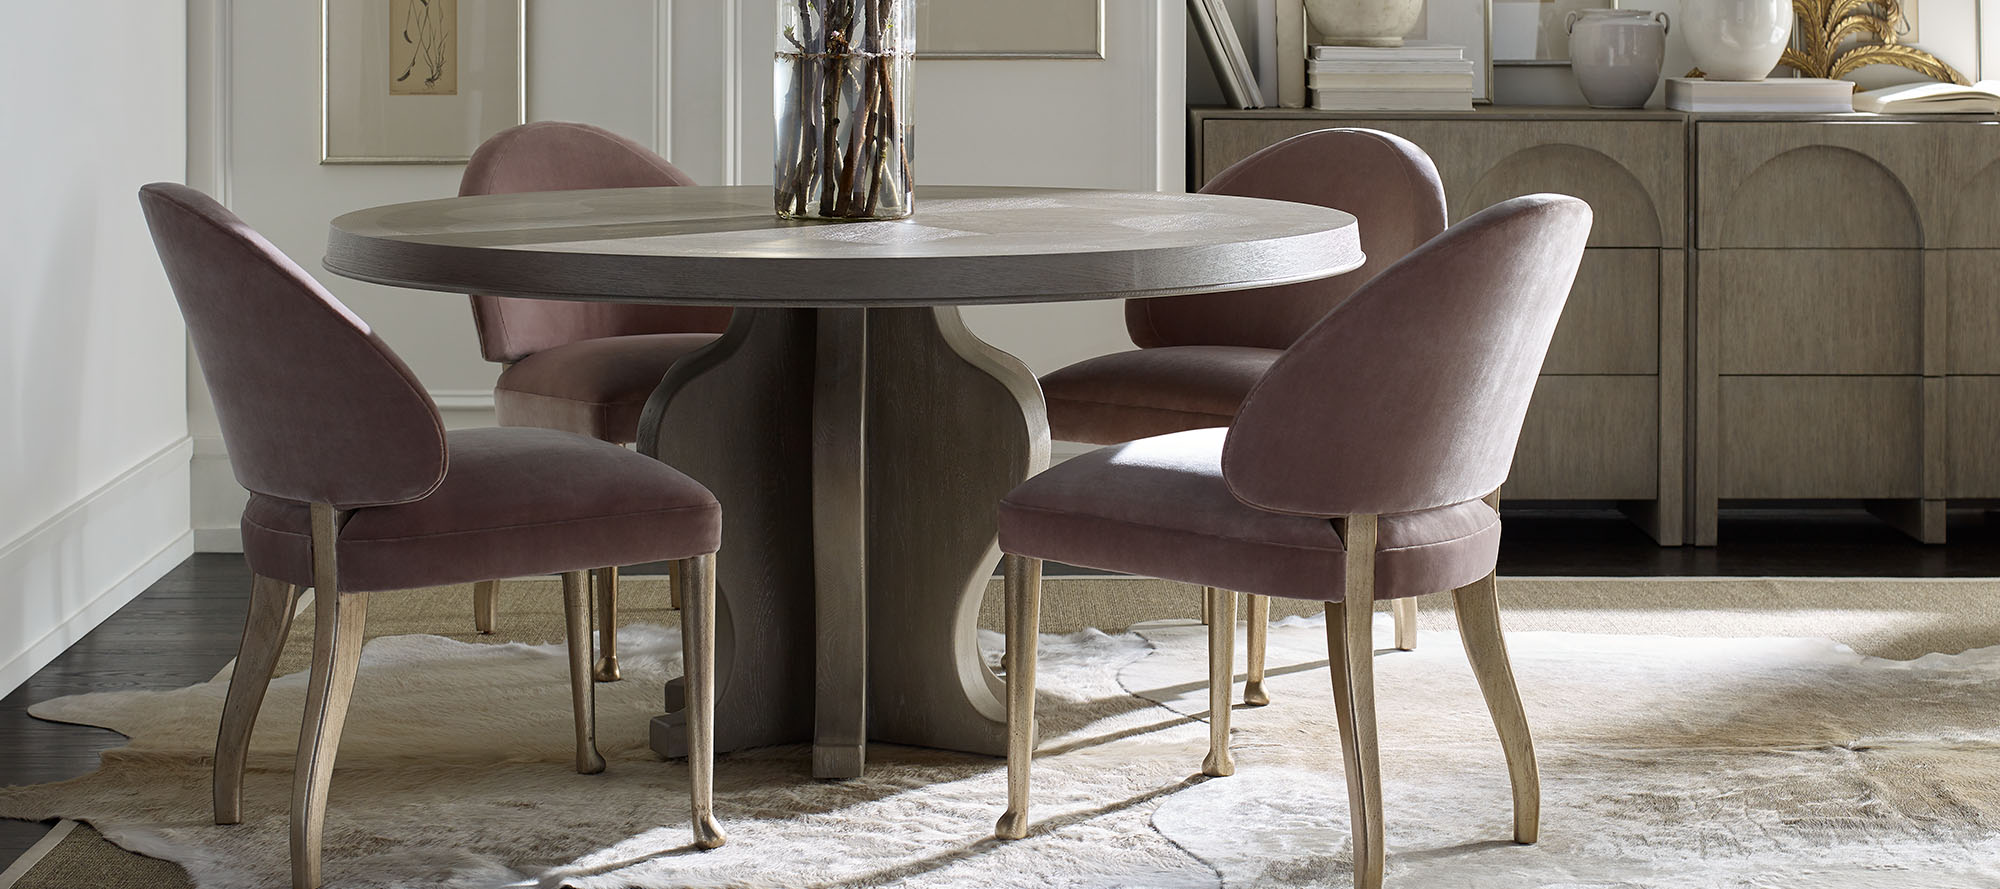 milling road dining room chairs